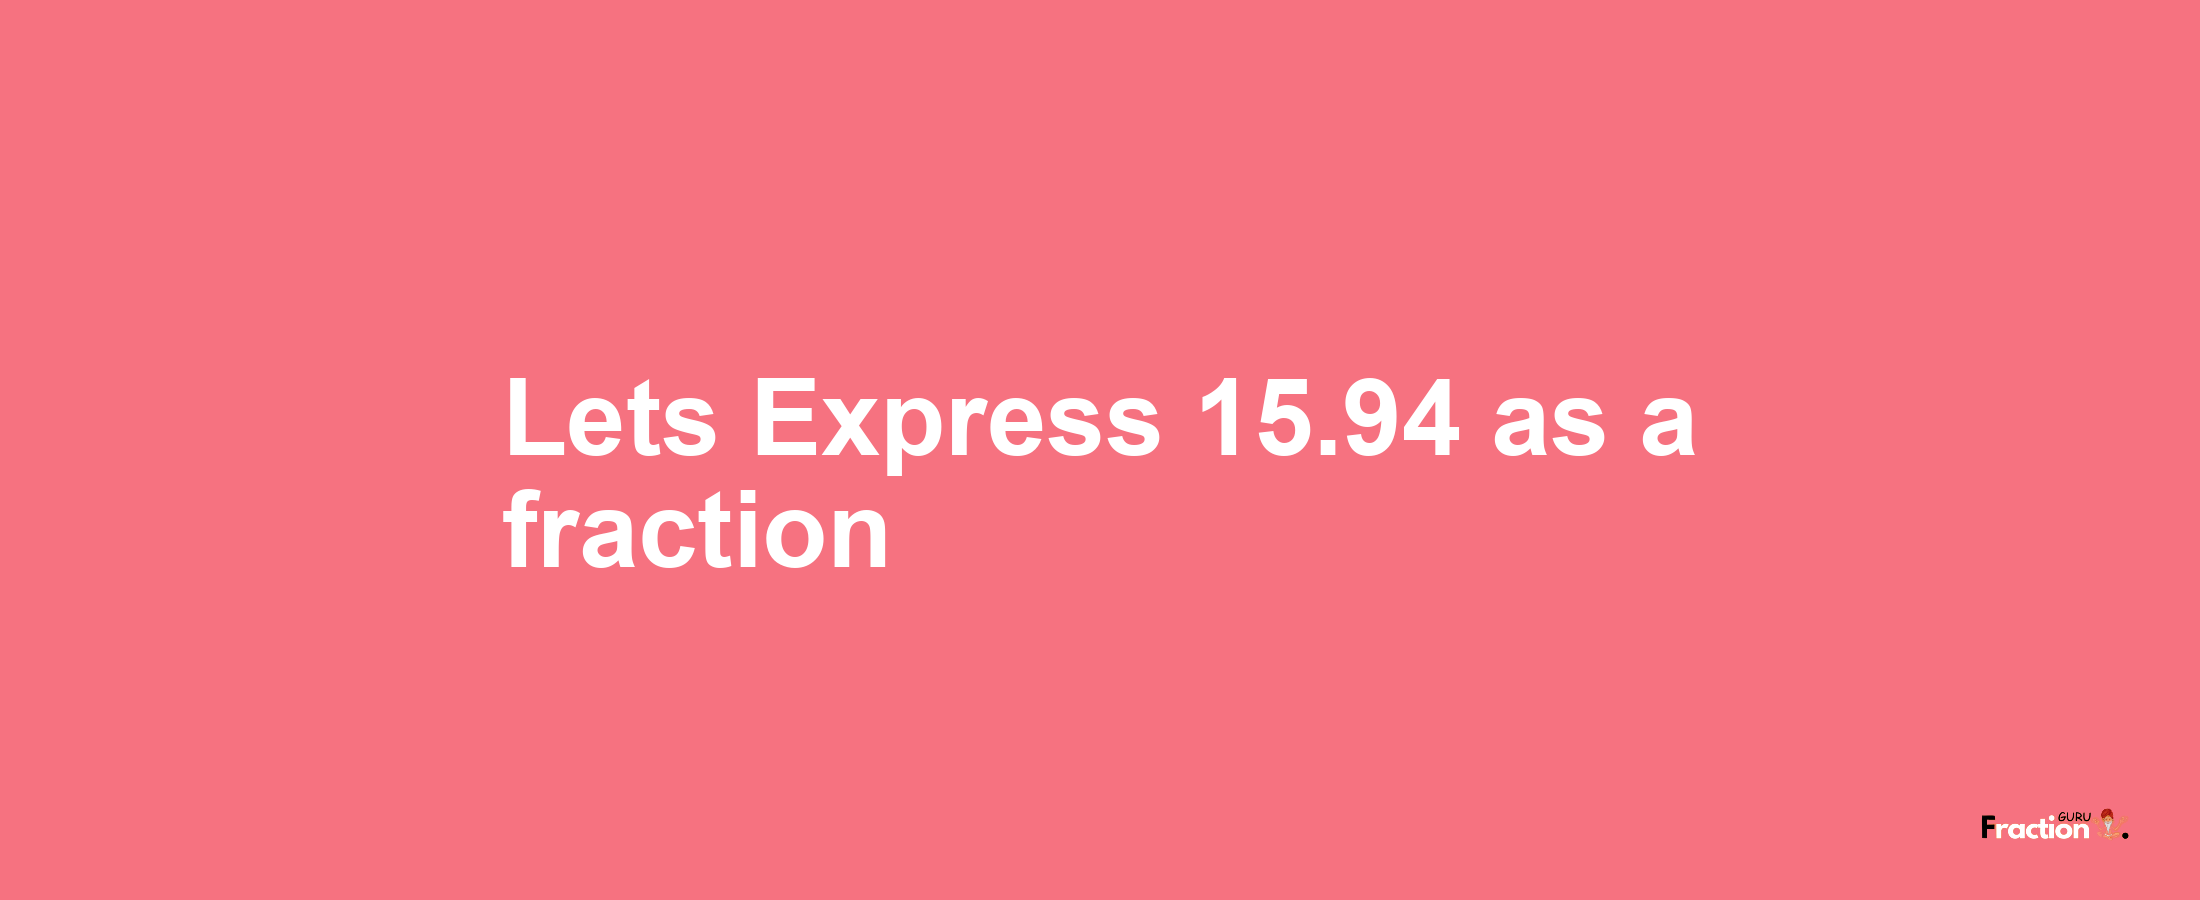 Lets Express 15.94 as afraction